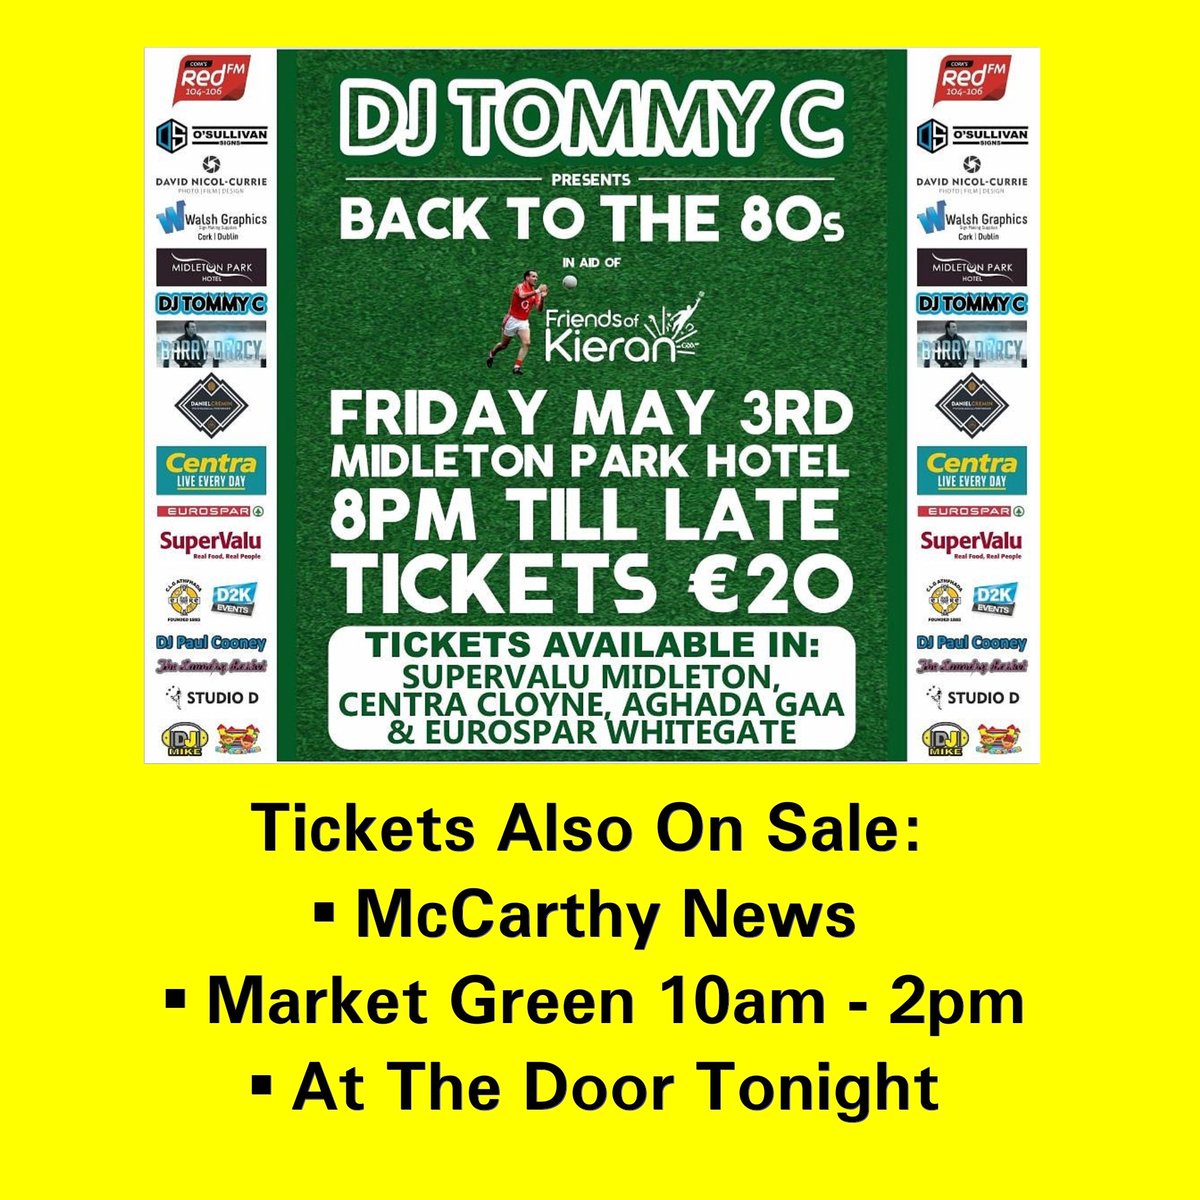 ▪At Market Green today 10 - 2pm (instead of 4pm ). Tickets available at the door tonight
🌟Come join us all for a great night out!!🌟
#midletonparkhotel
#80'snight #friendsofkieran  #djtommyc @AghadaGAA @Aghadacamogie @AghadaJuvGAA @AghadaLGFC